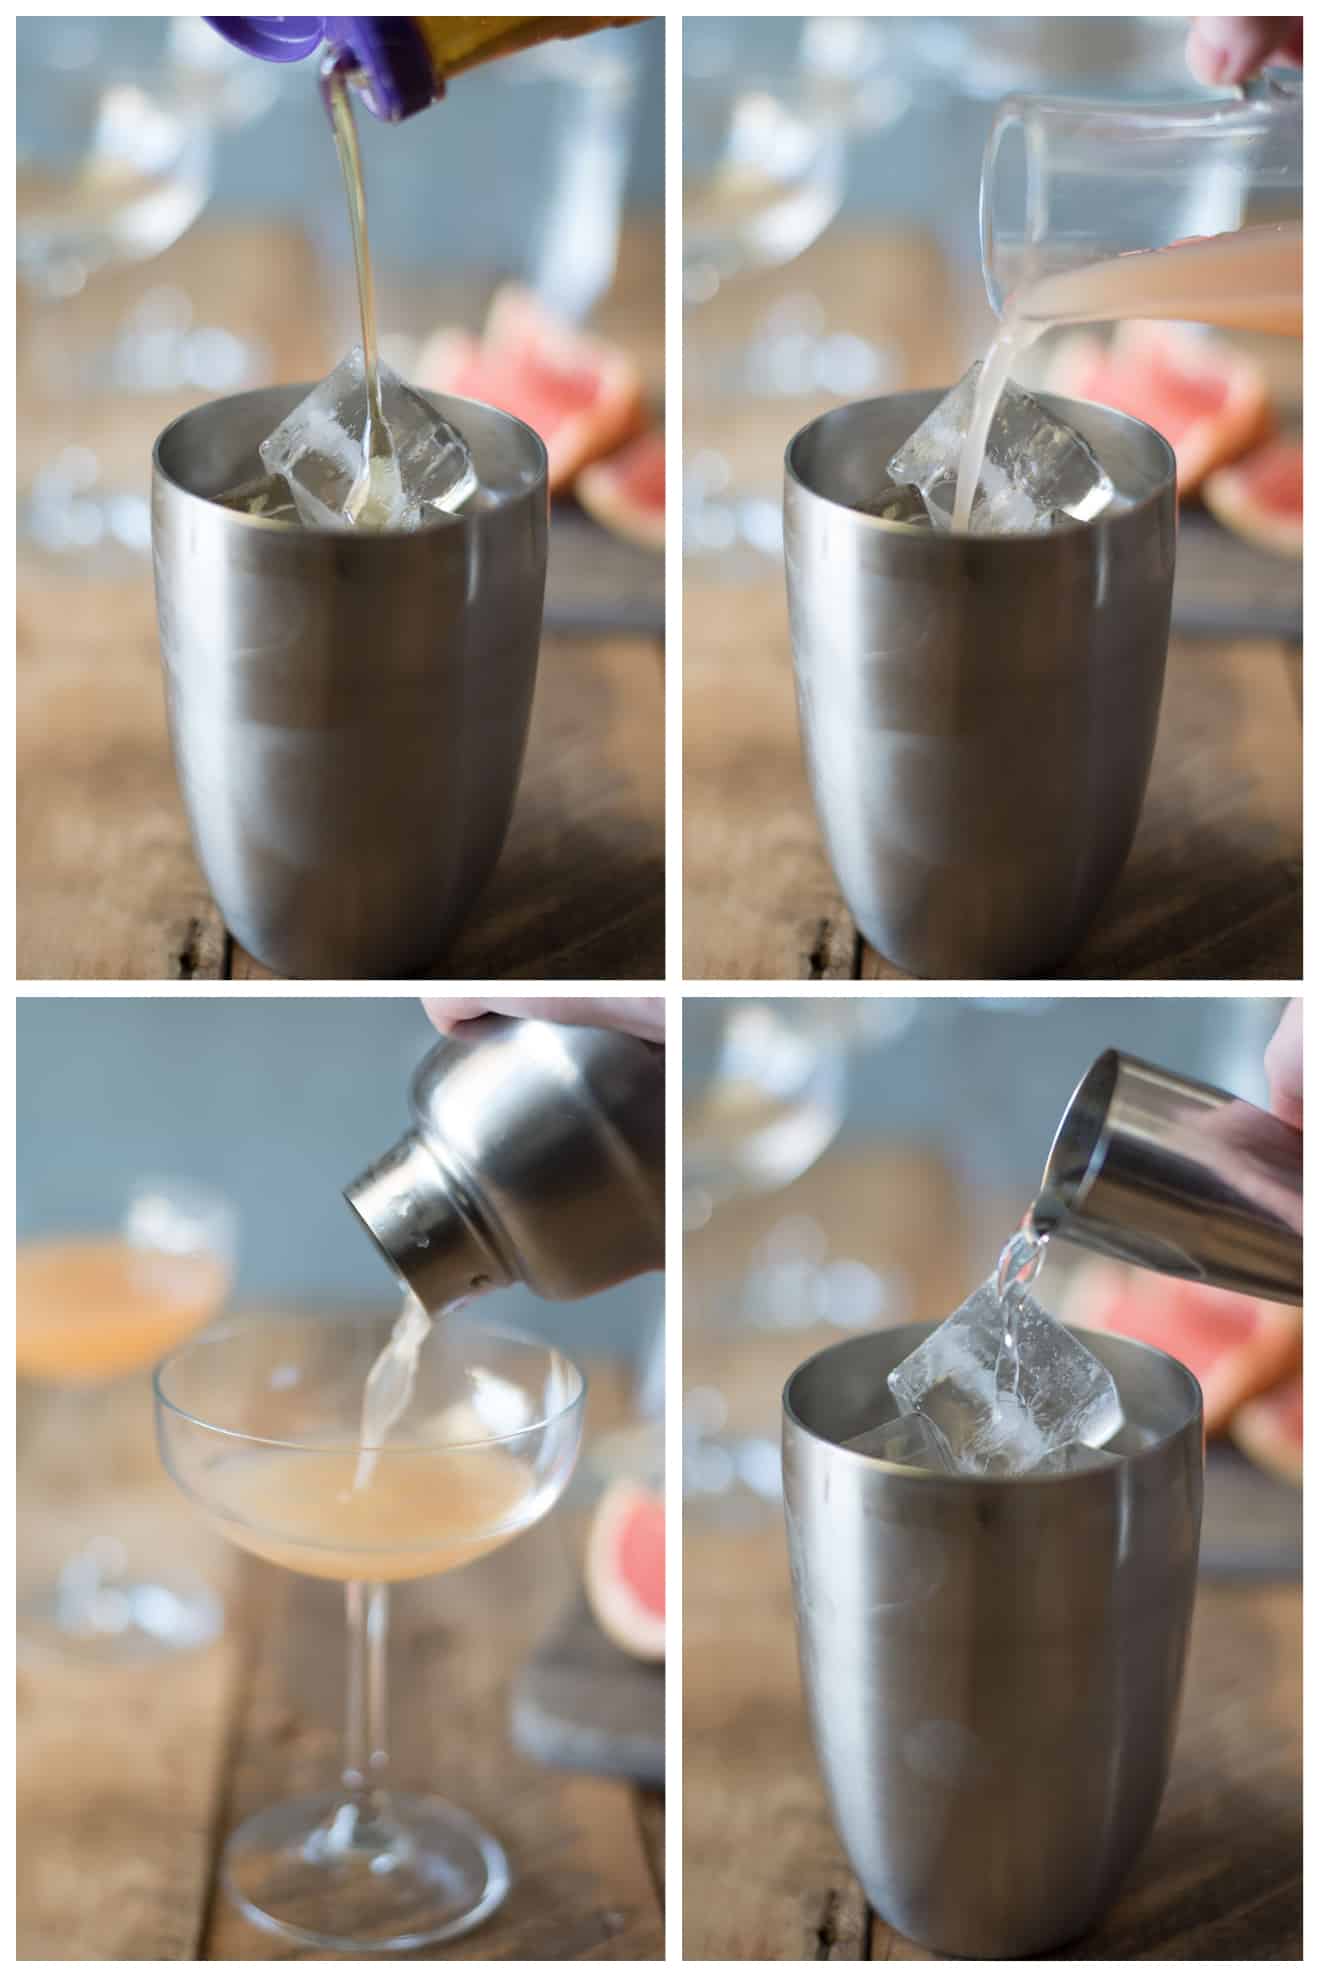 The stages of mixing the cocktail. Pouring the ingredients